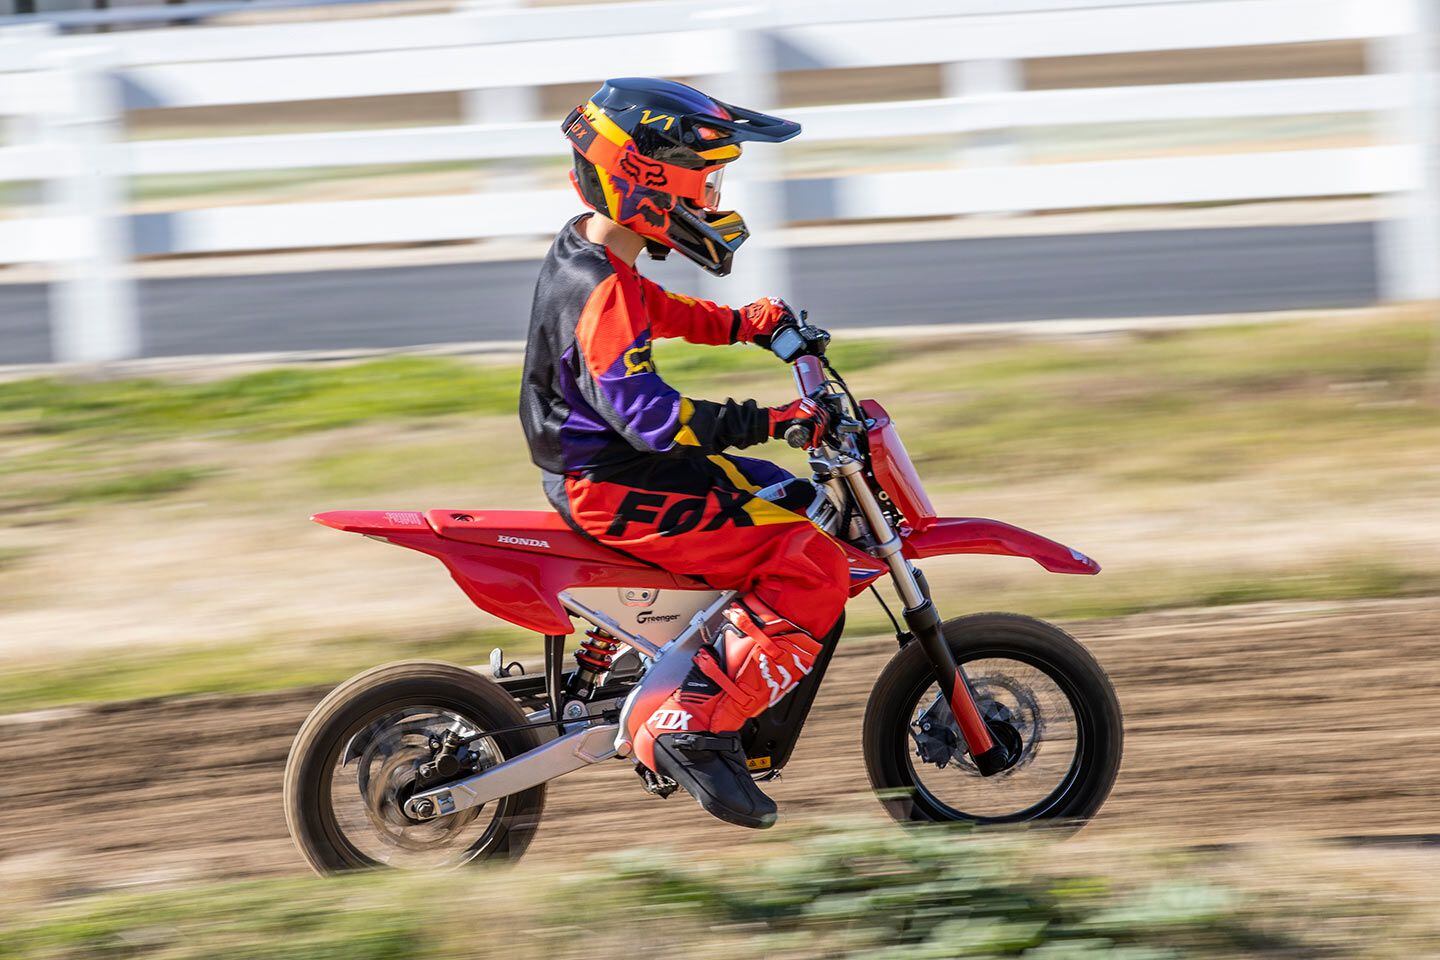 The CRF-E2 is designed for first-timers. It’s quiet and easy to ride, making it well suited to teaching kids how to ride a motorcycle.